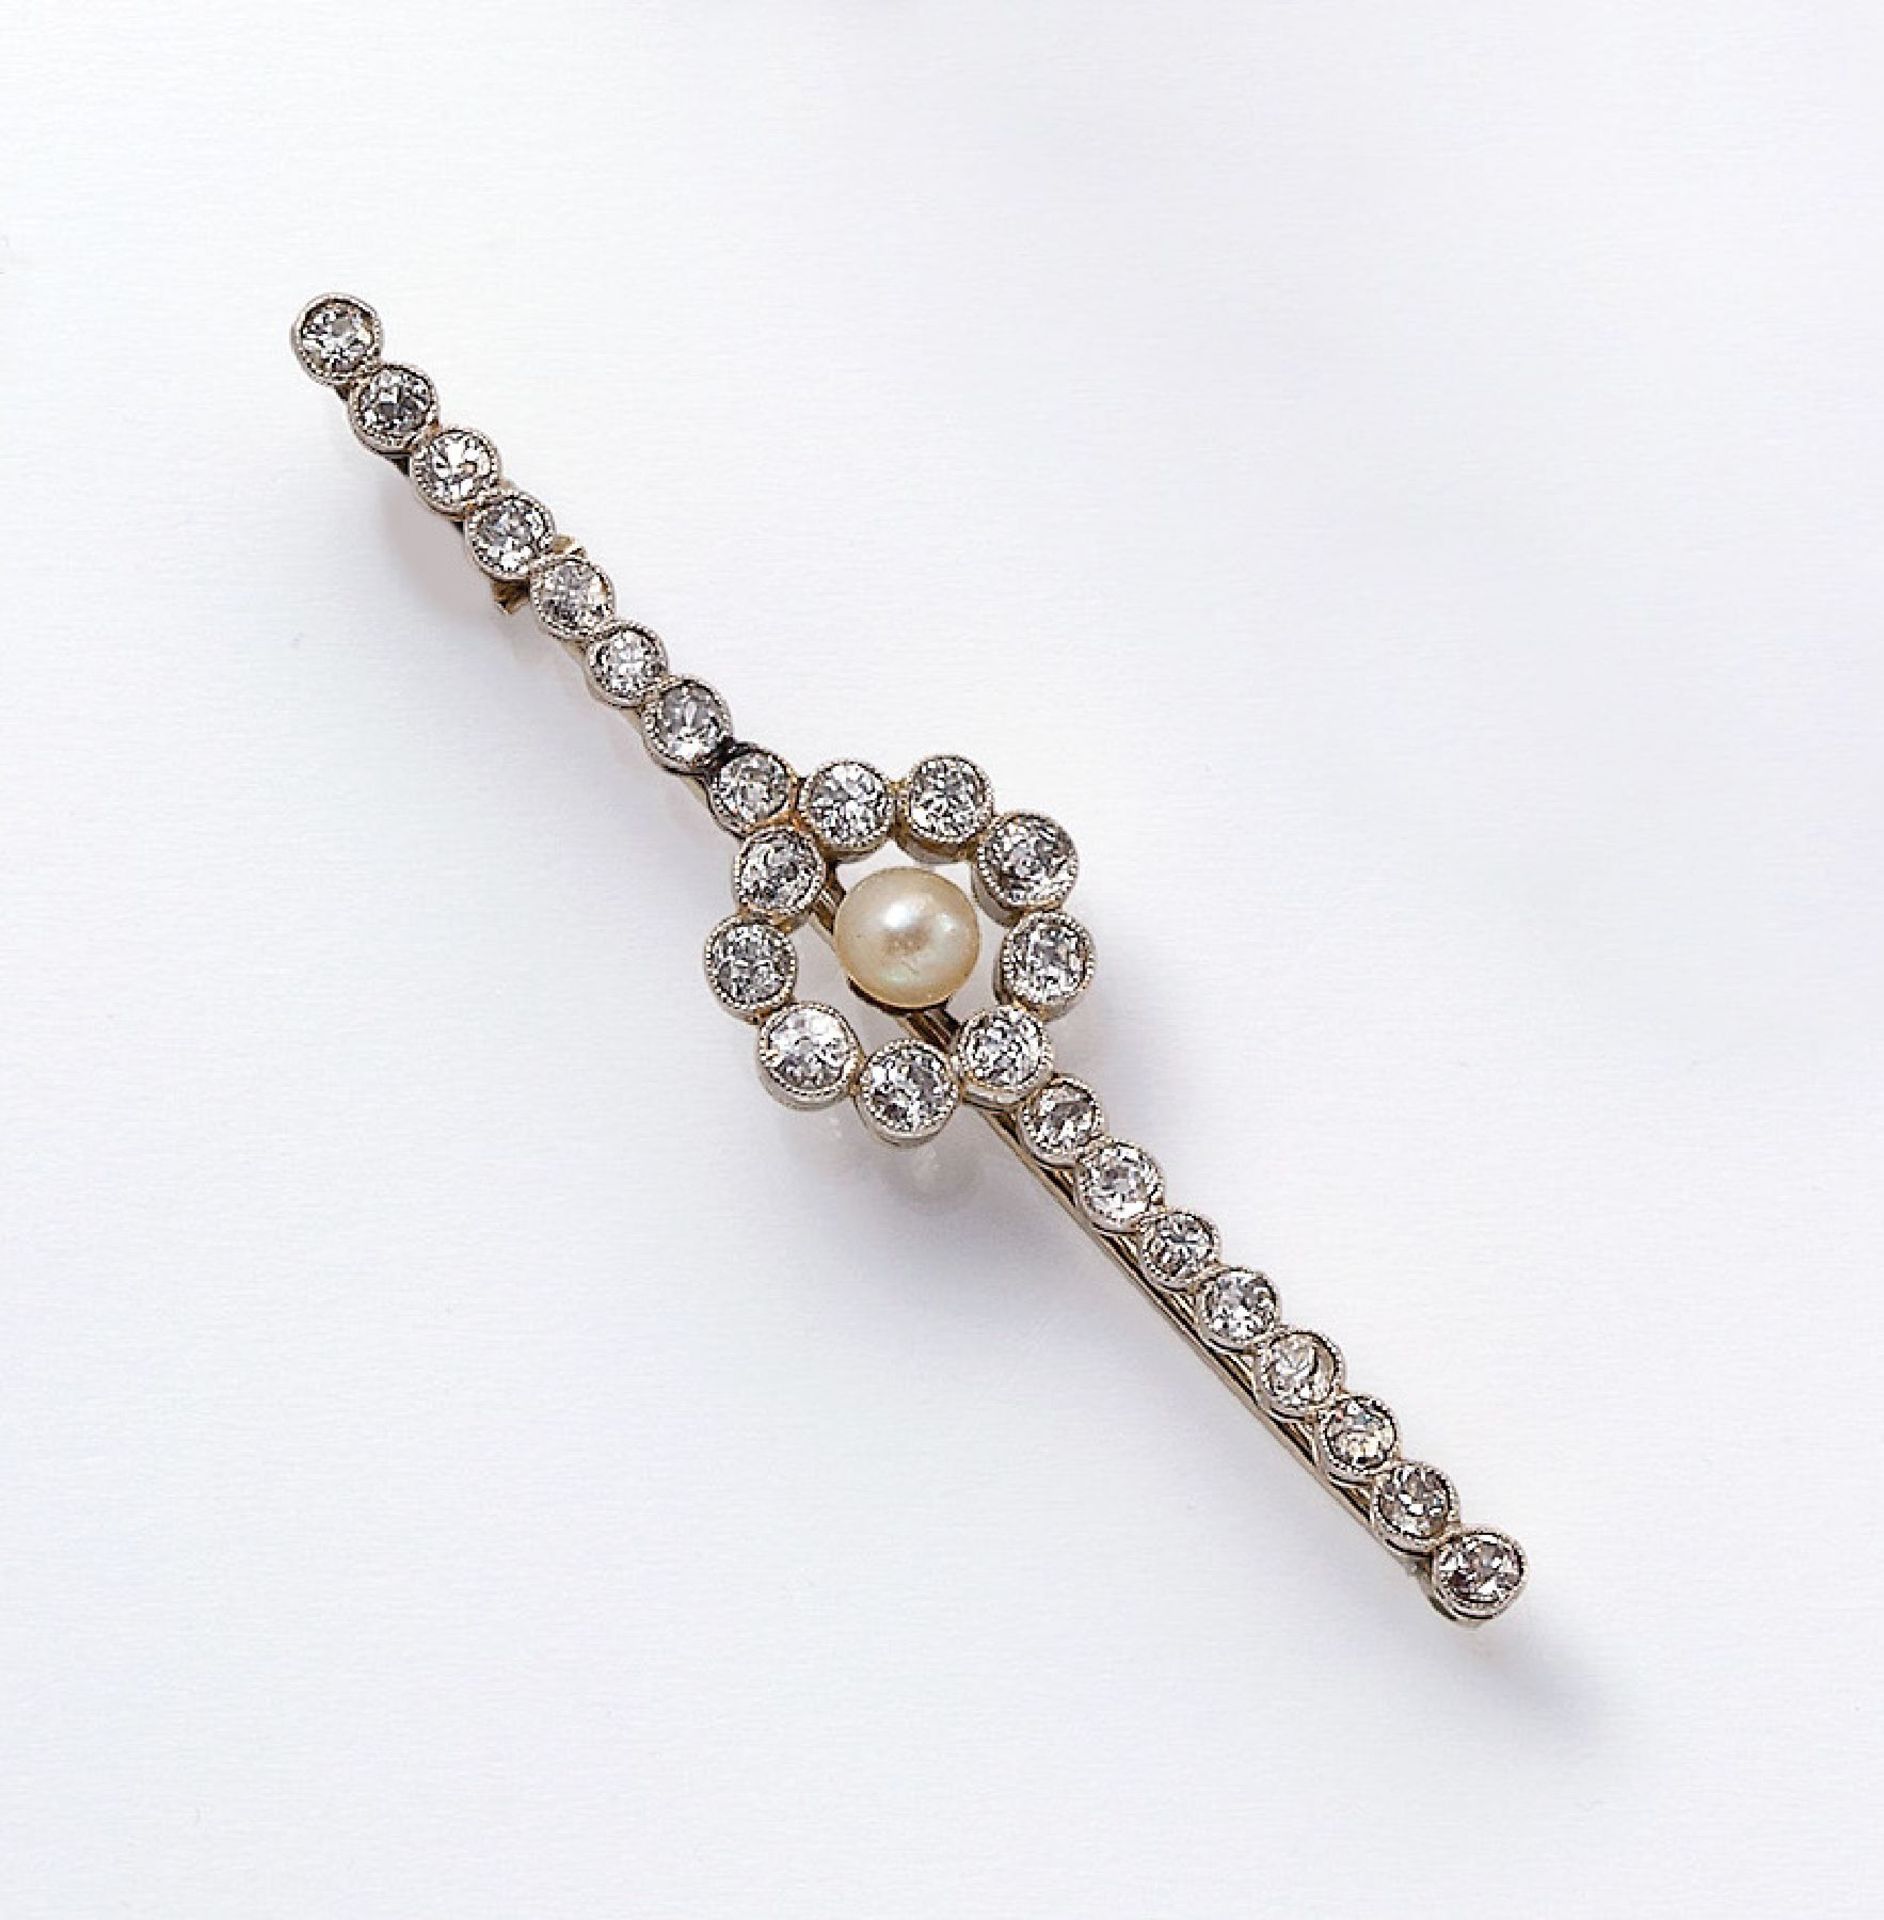 14 kt gold Art-Deco brooch with diamonds and orient pearls , approx. 1920, WG 585/000, centered